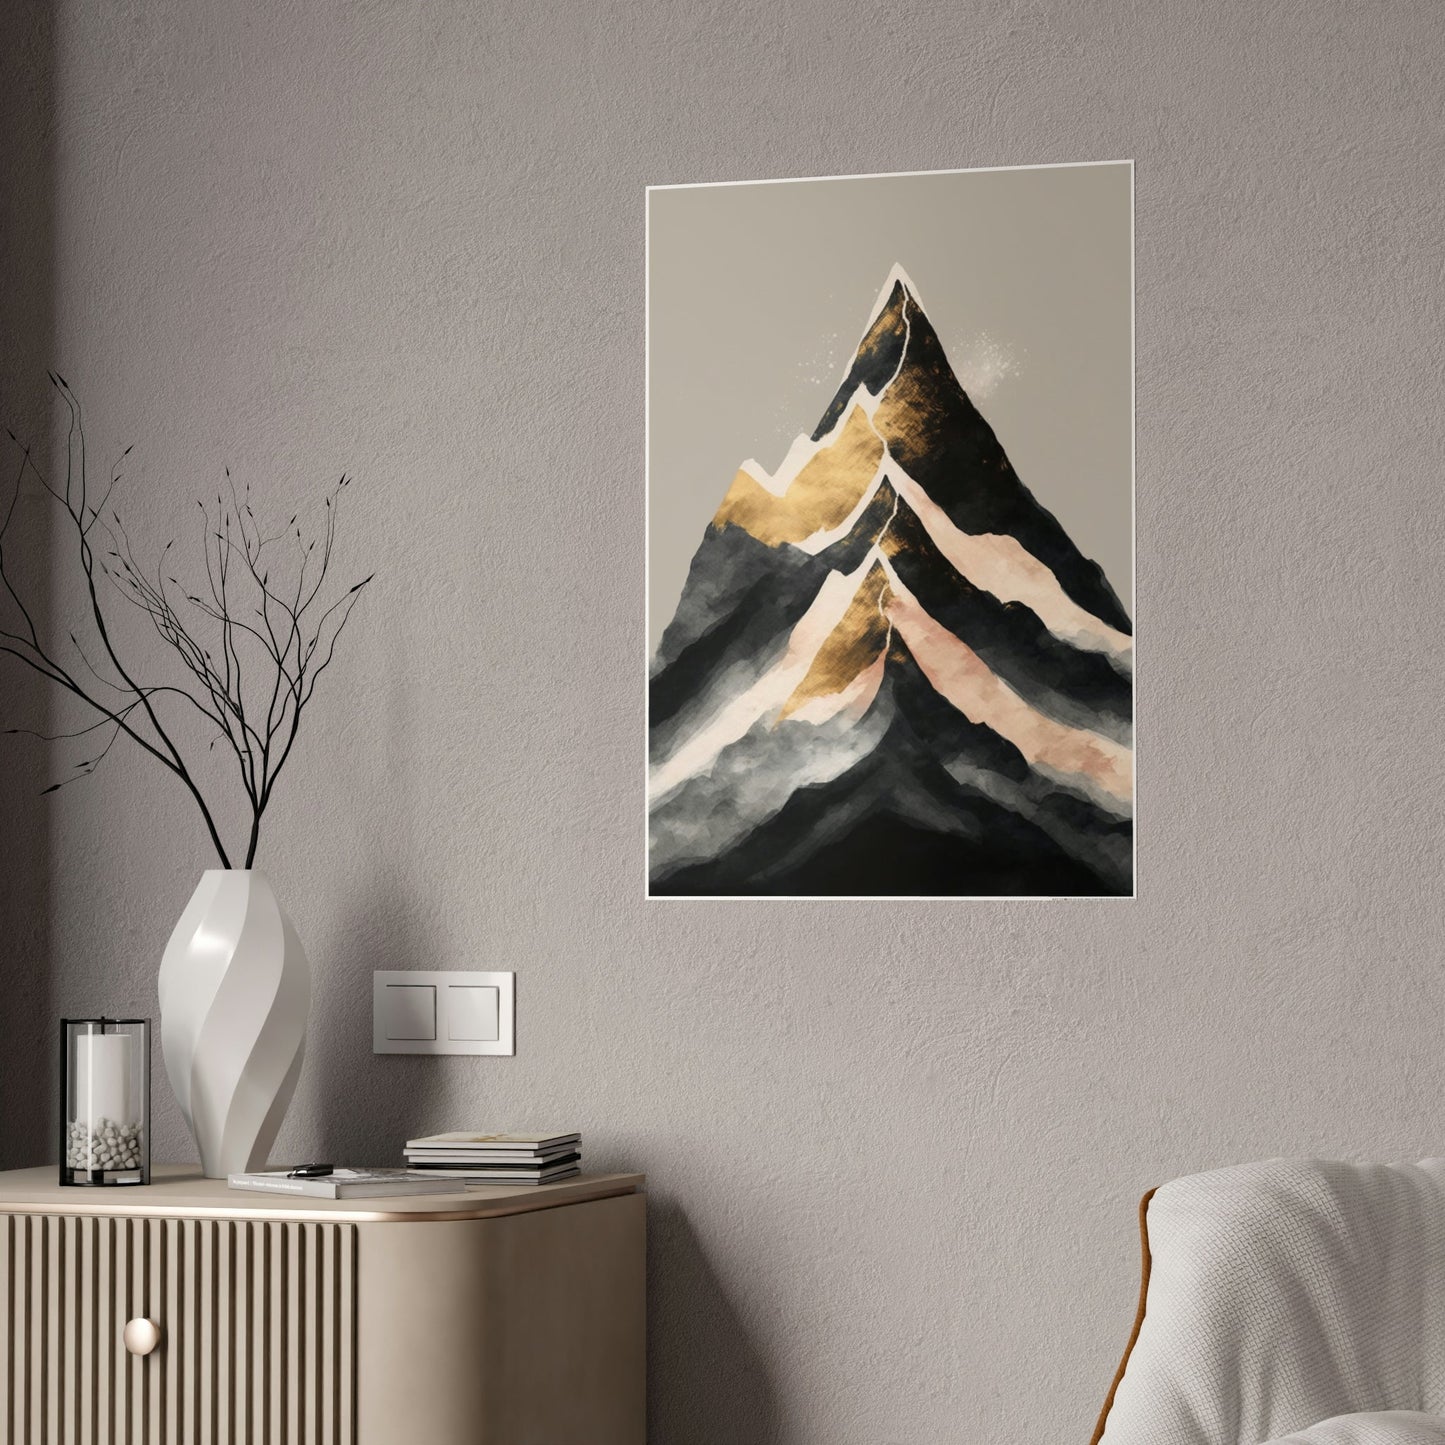 Harmony of Forms: A Natural Canvas & Poster Wall Art of an Abstract Landscape